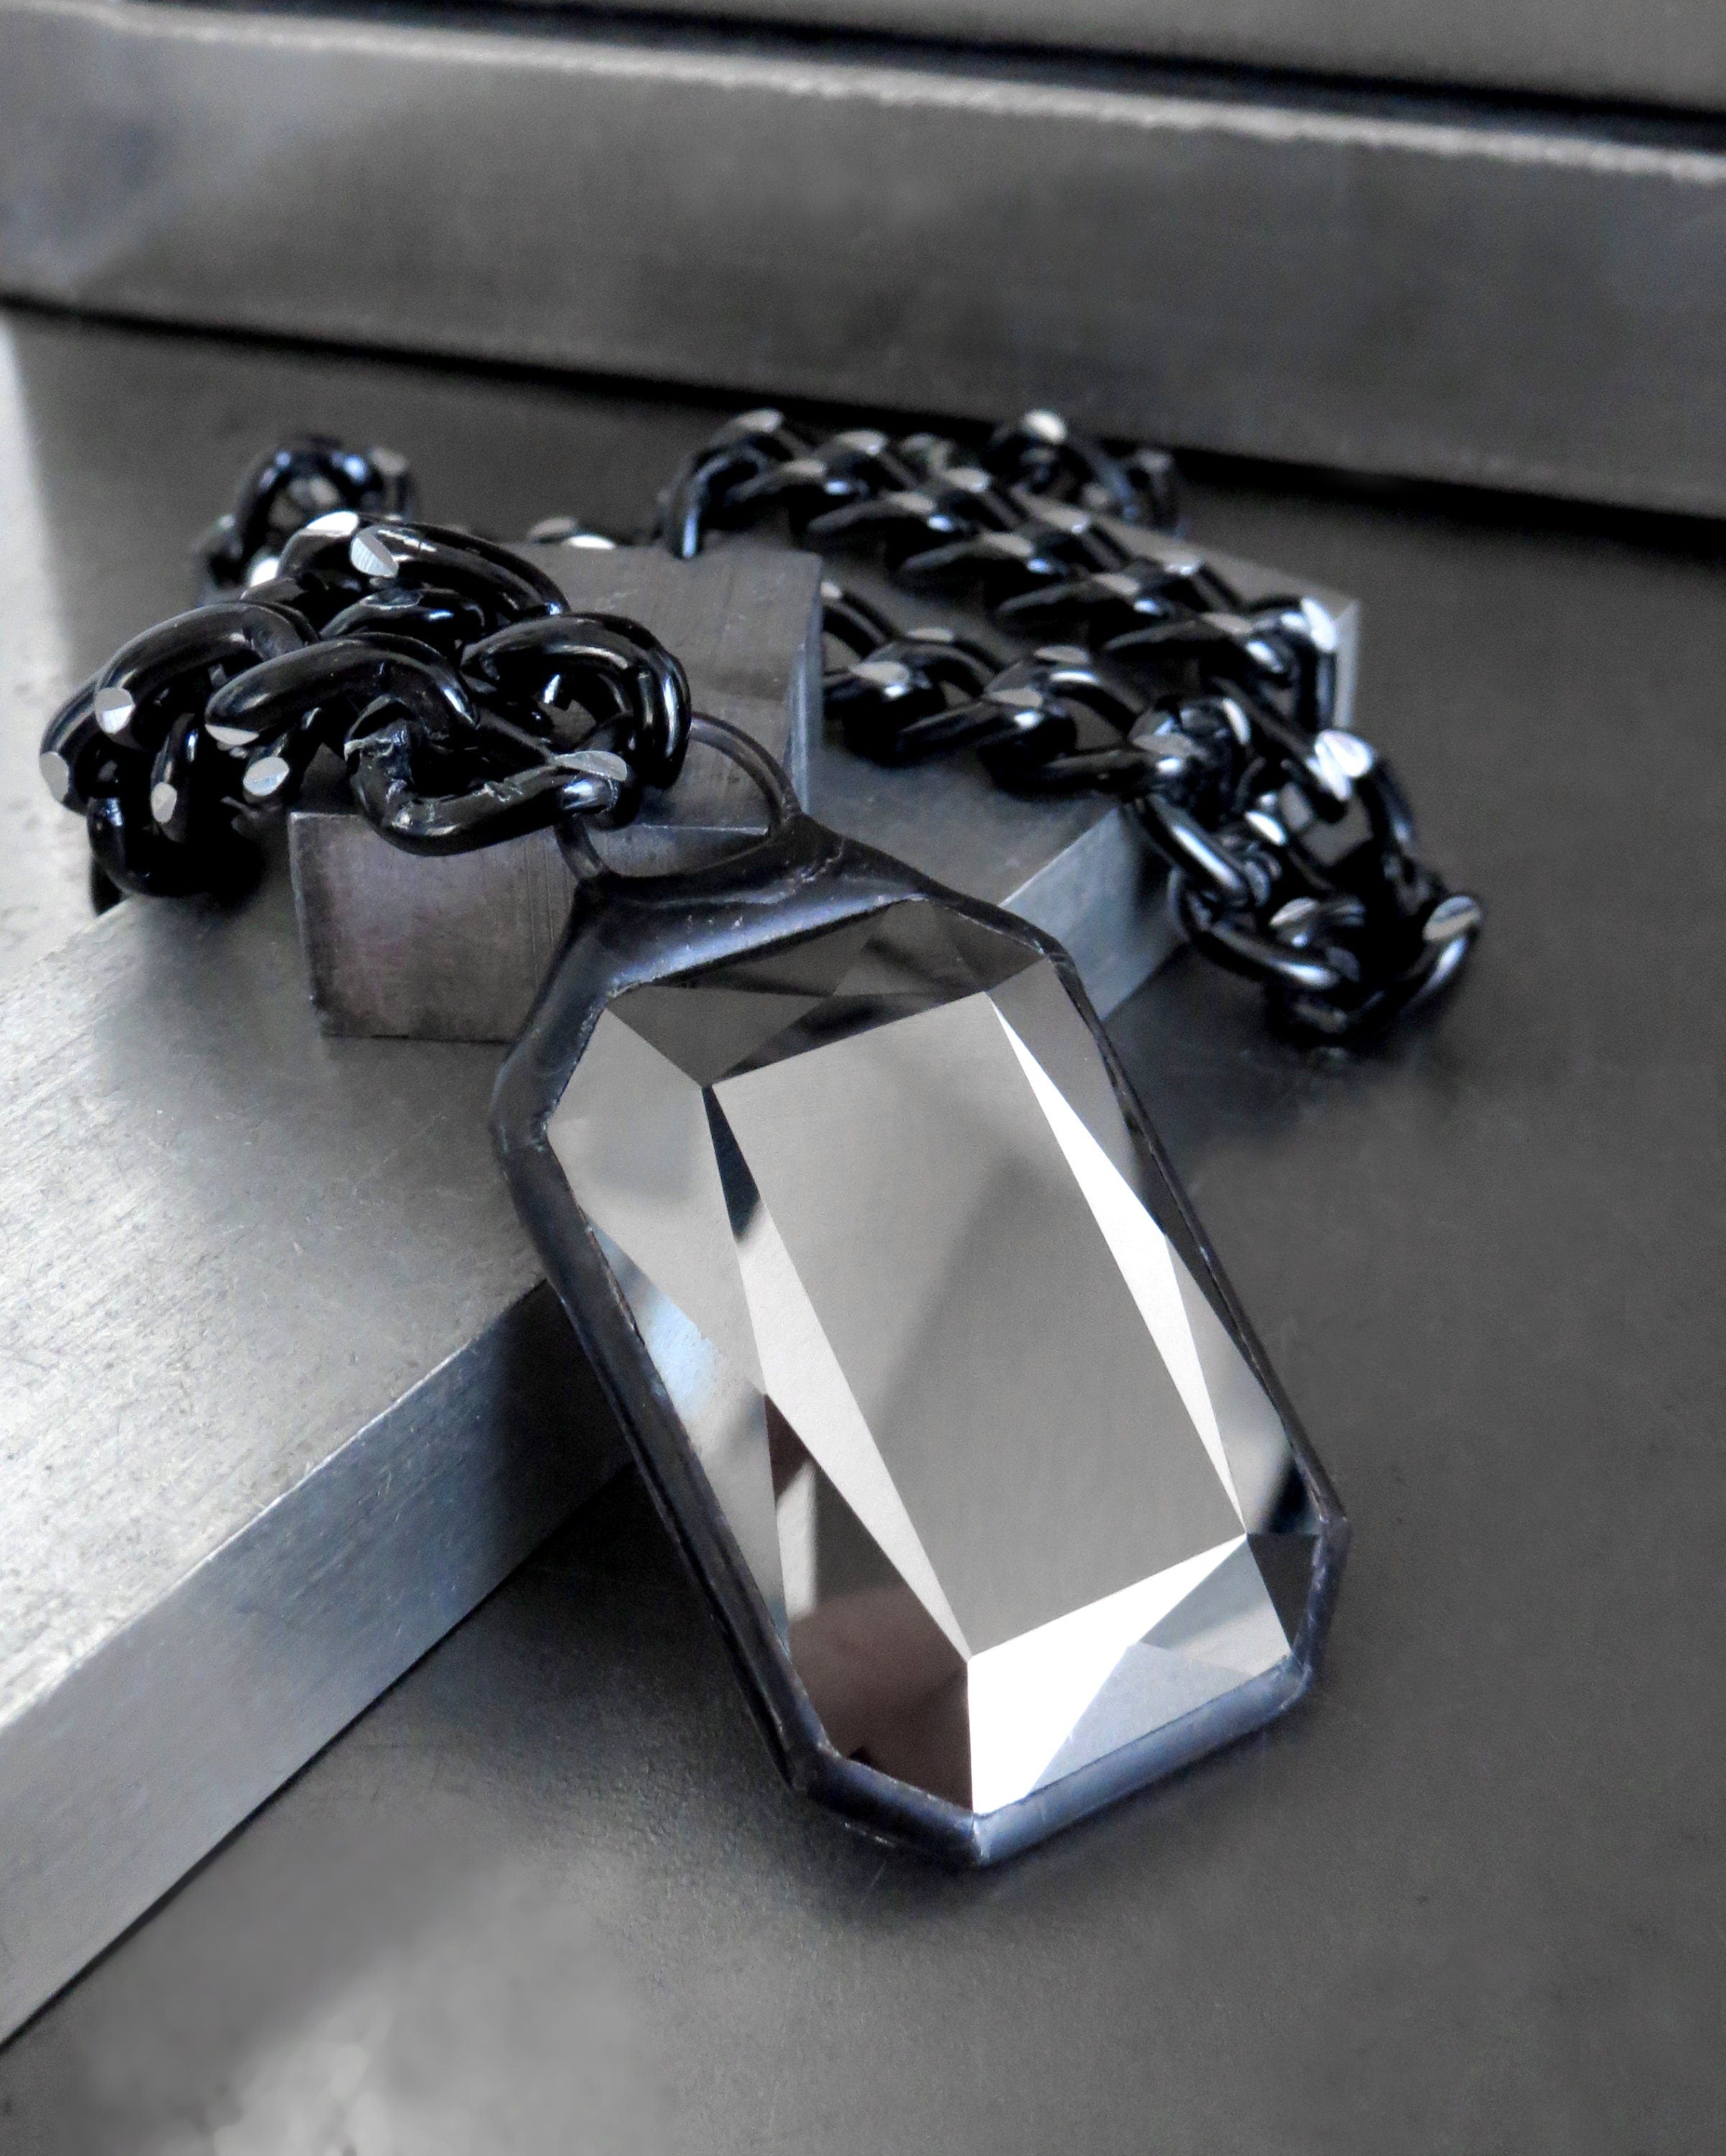 CARBON - Large Crystal Statement Necklace - Two-Sided Metallic Dark Silver + Black Crystal Pendant, Thick Silver Black Chain, Modern Jewelry